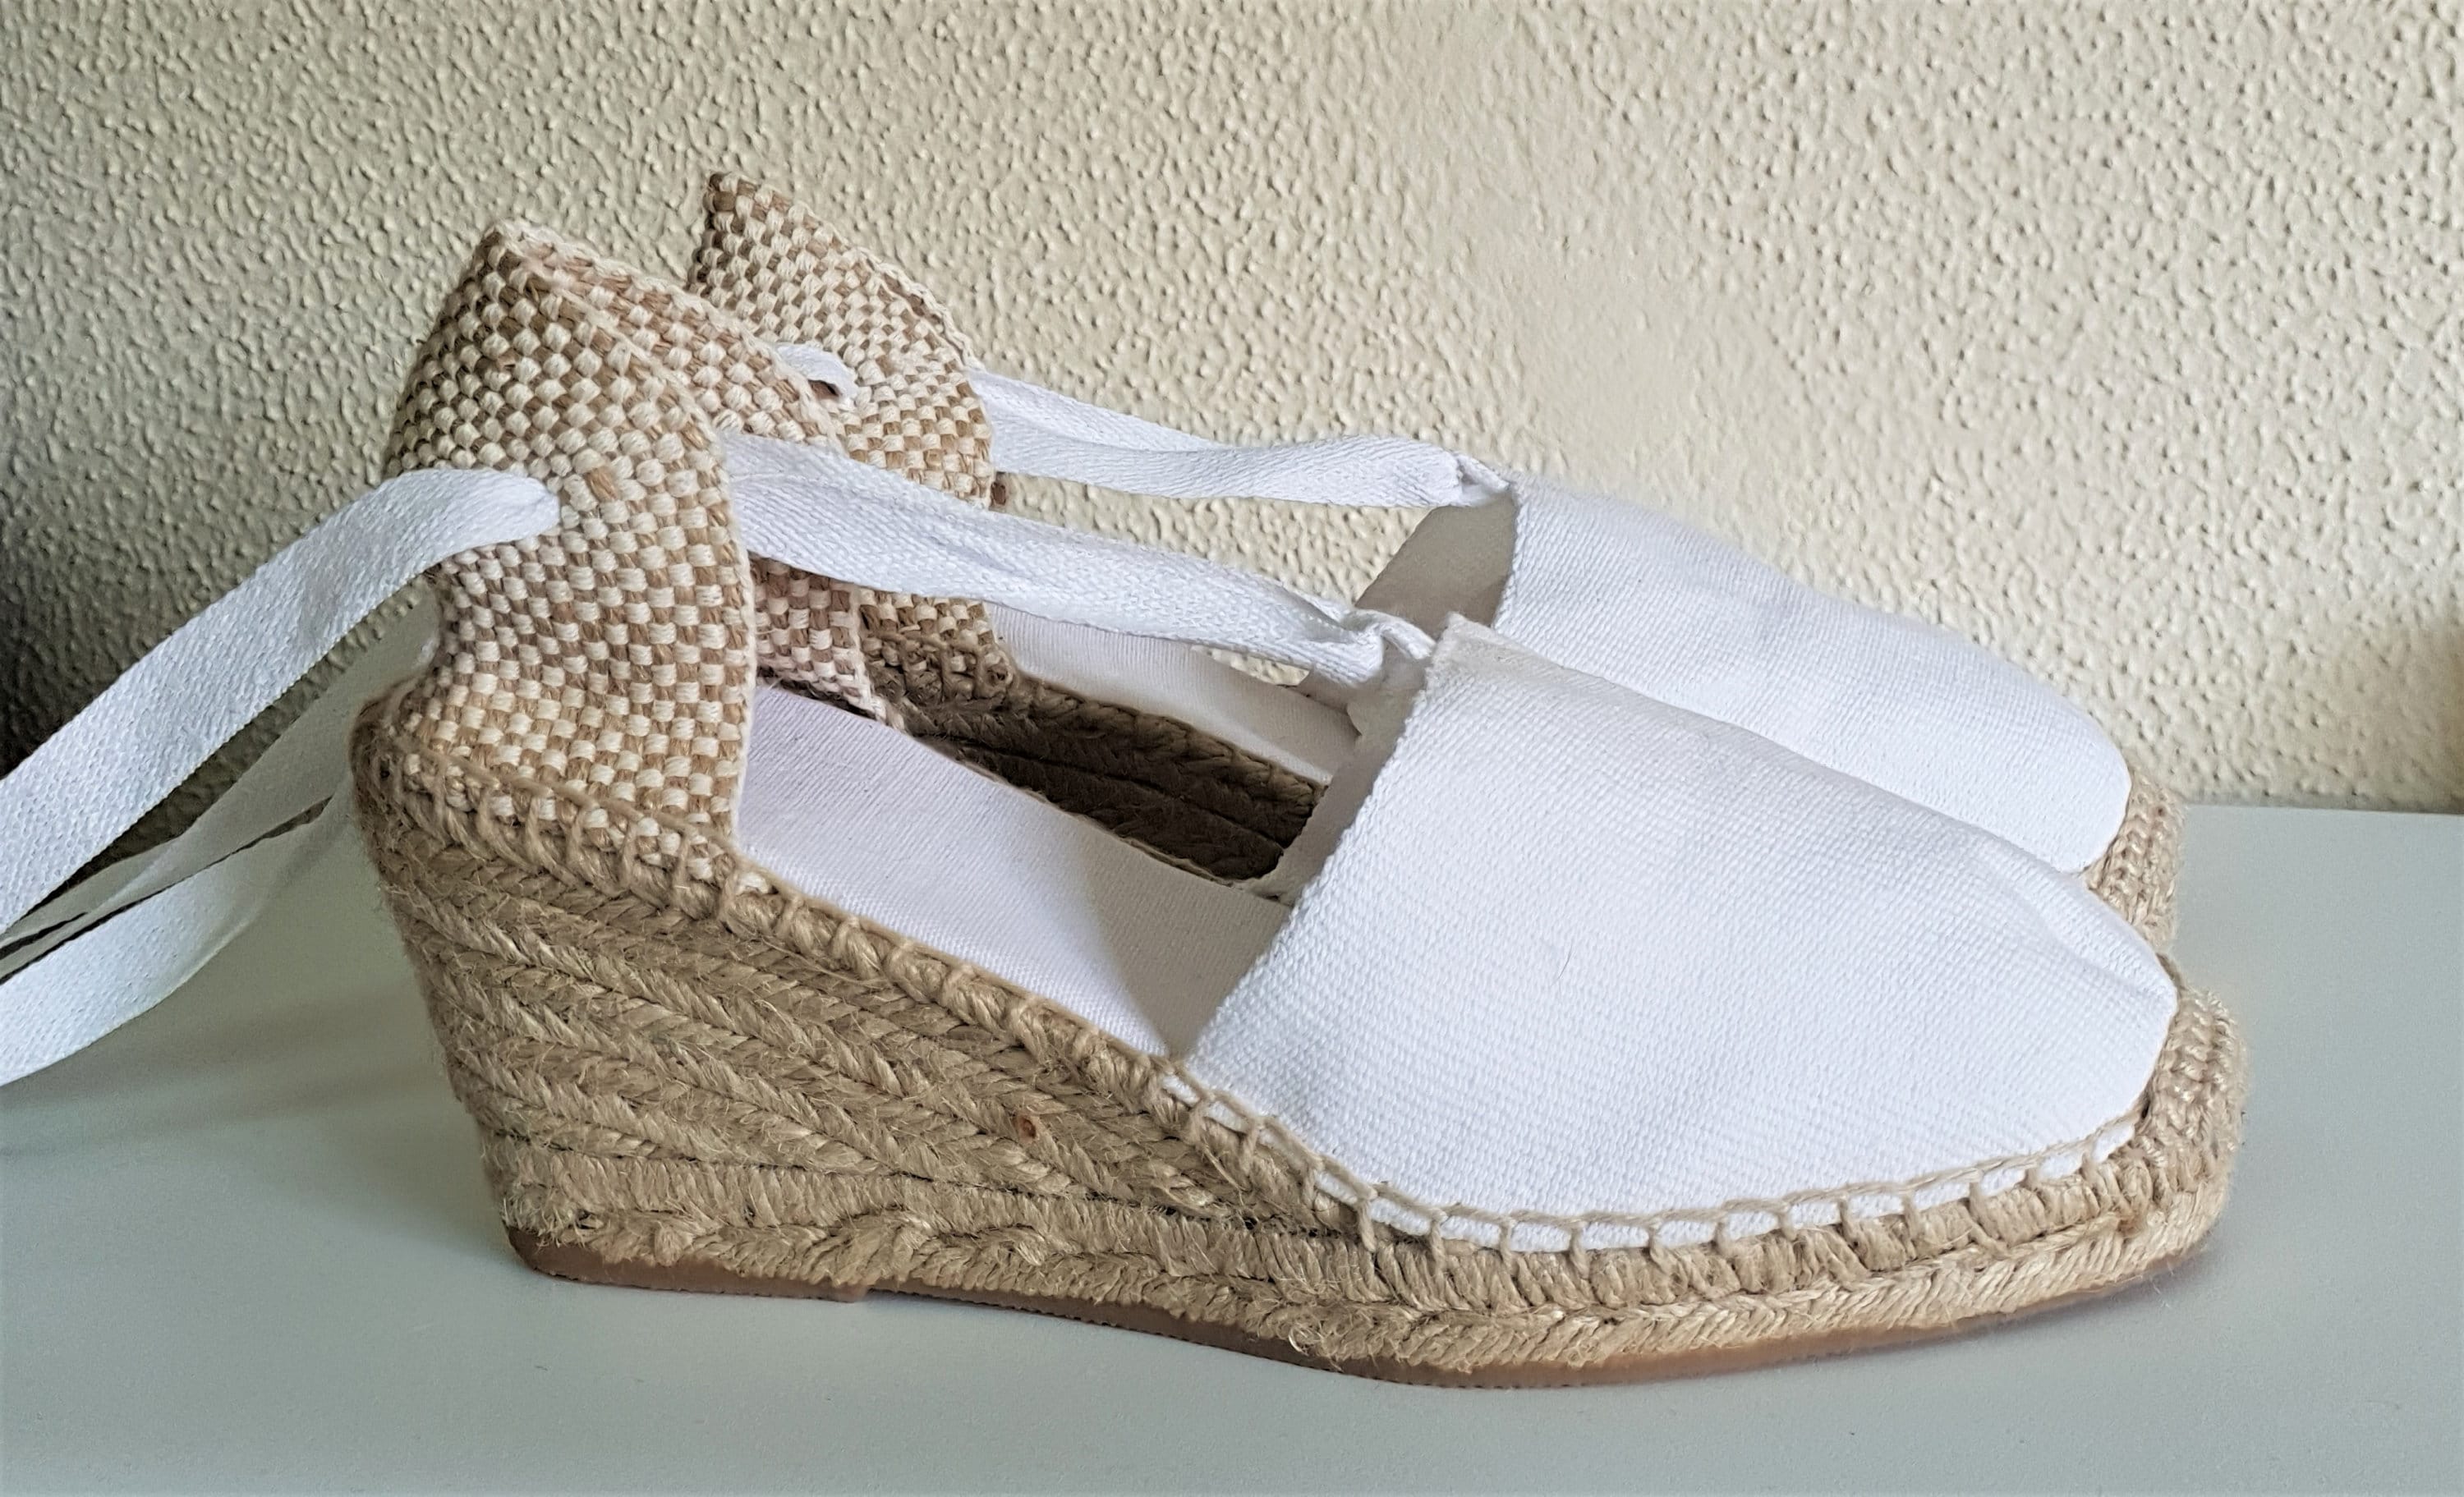 Lace Up espadrille high wedges (7cm-2.76) - VISBLE SEAM / WHITE - made ...